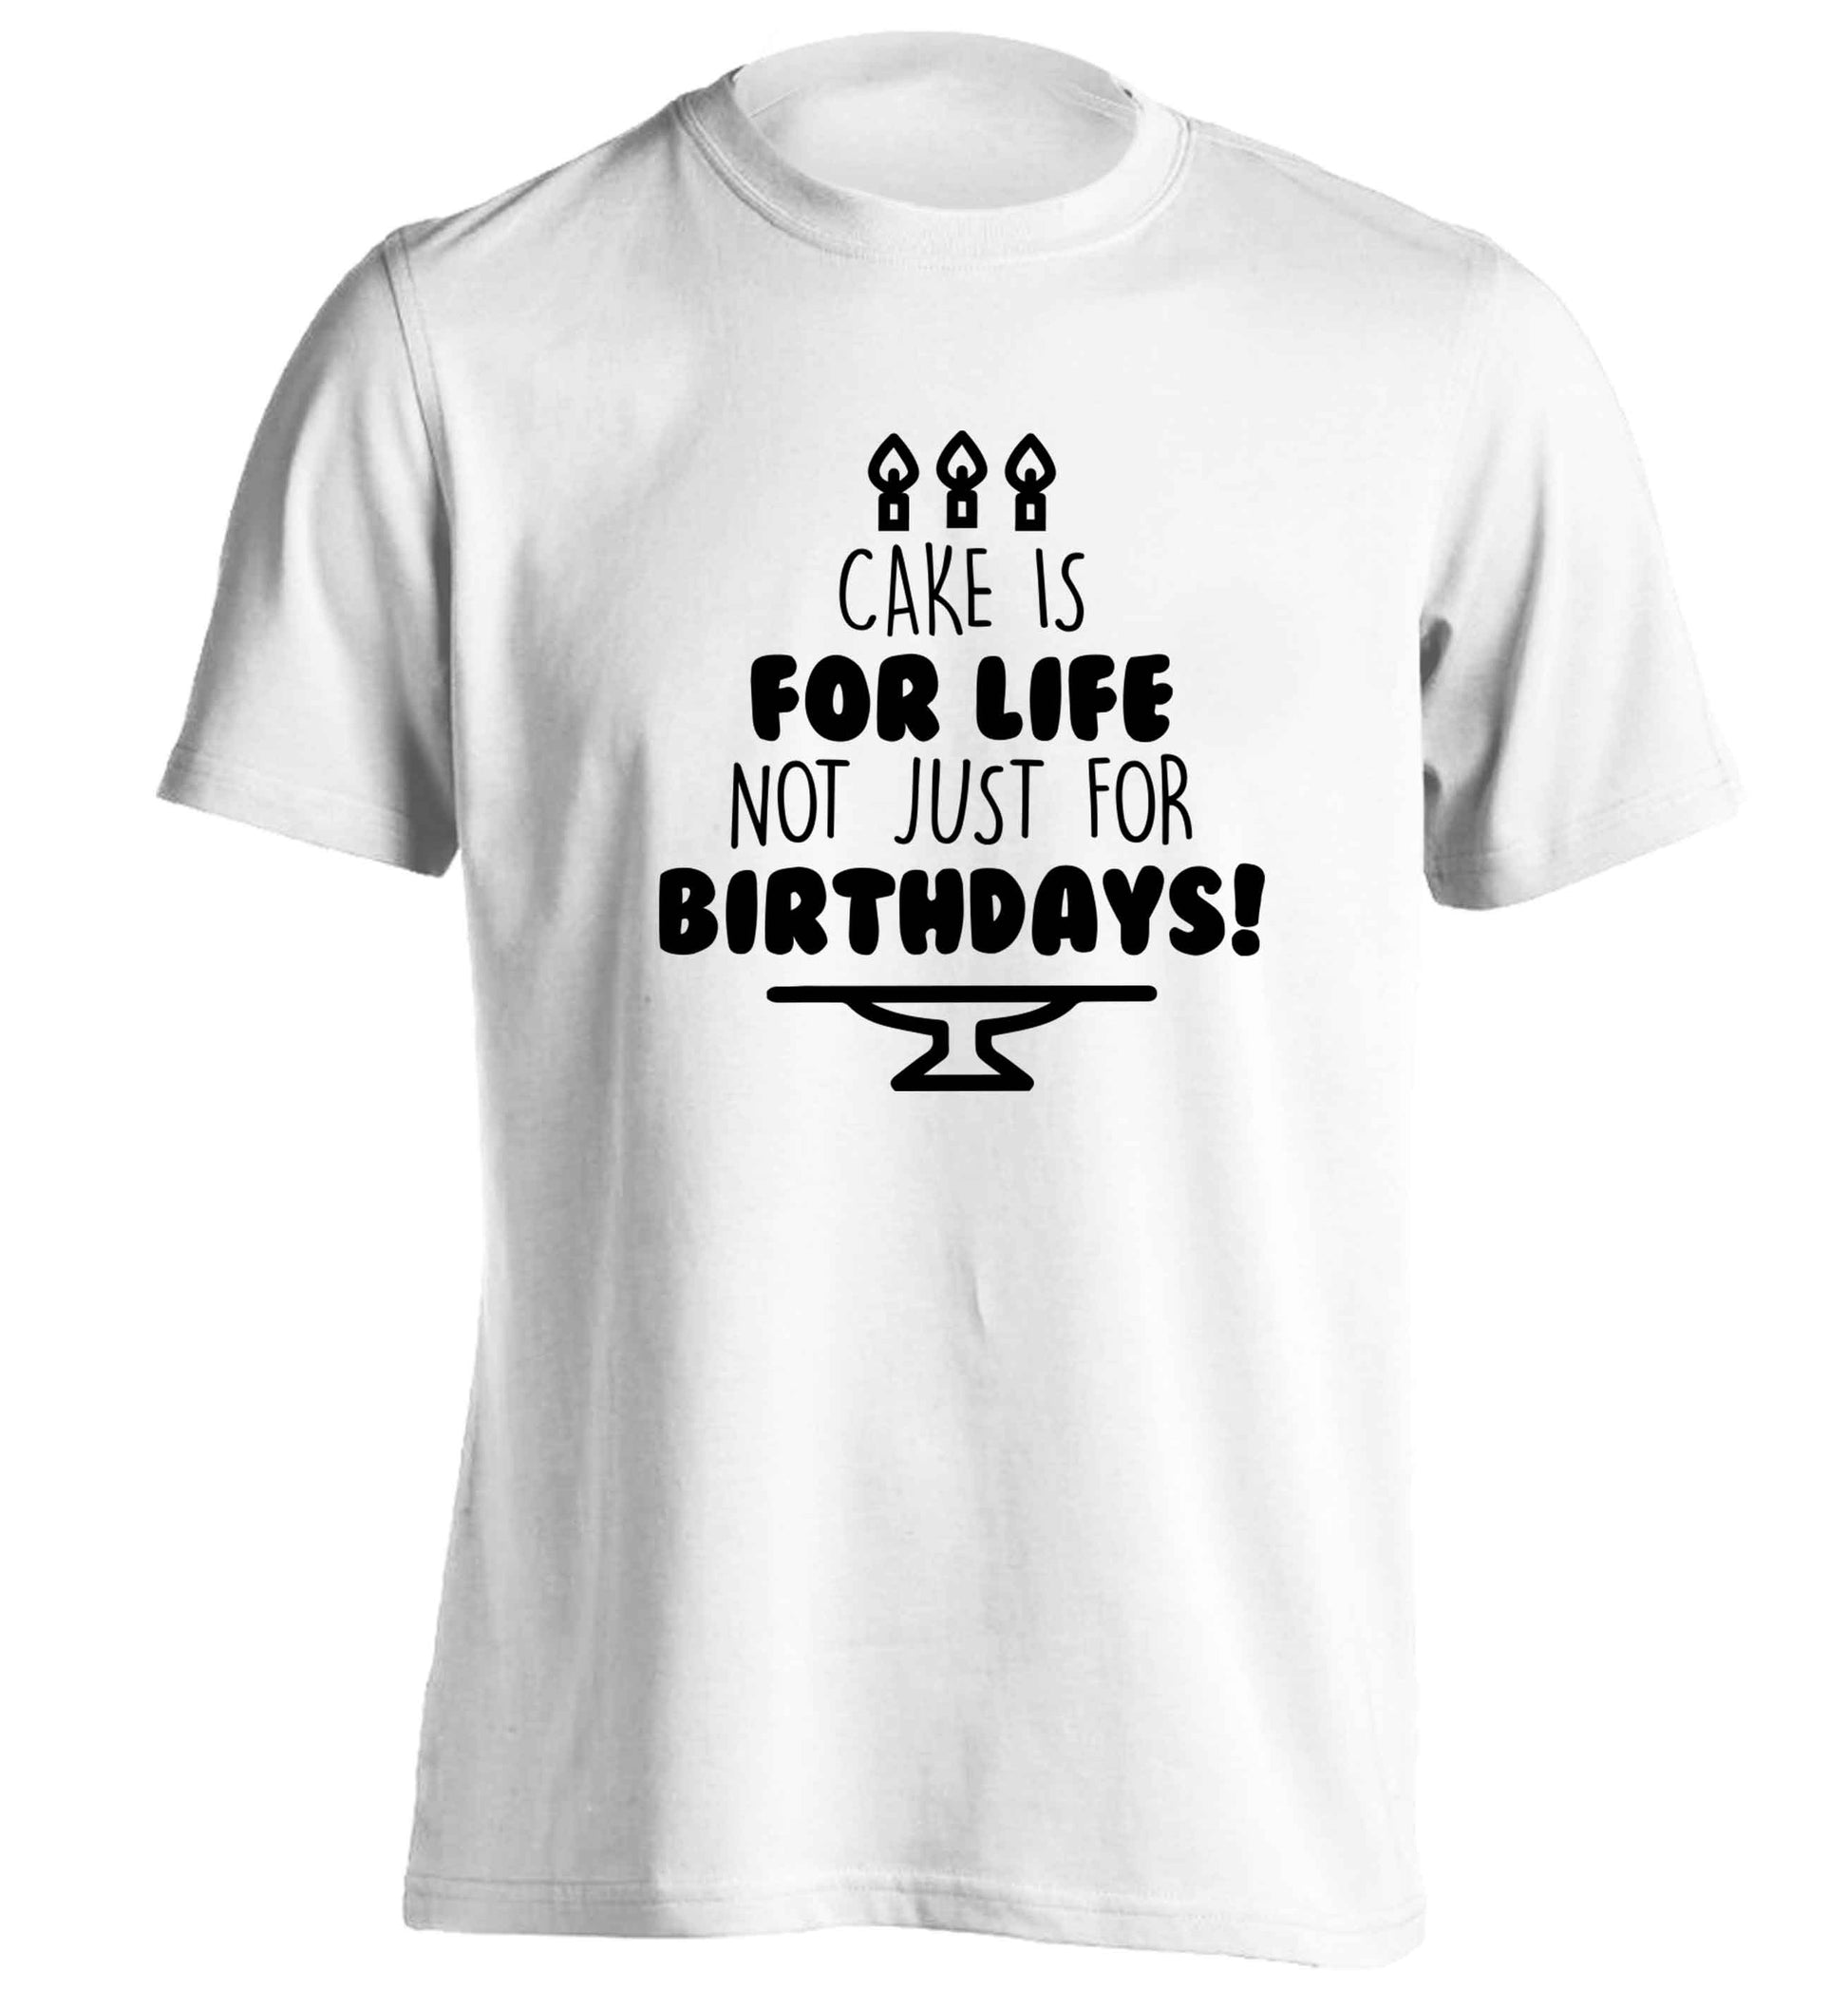 Cake is for life not just for birthdays adults unisex white Tshirt 2XL